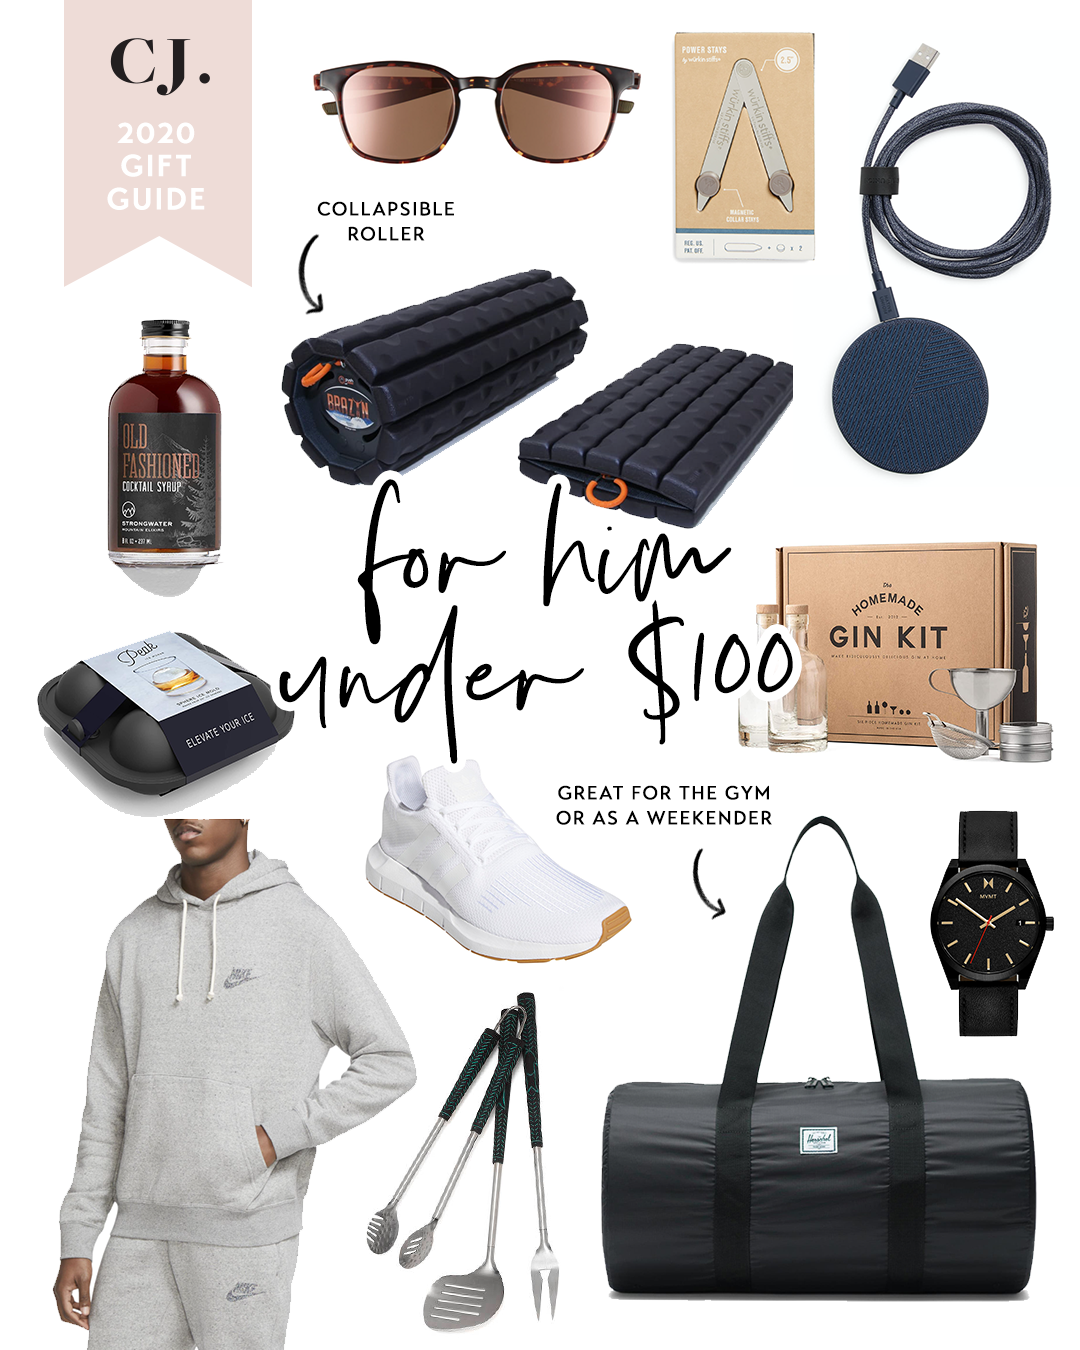 Gifts for Men Under $100, Gifts Under $100 for Him